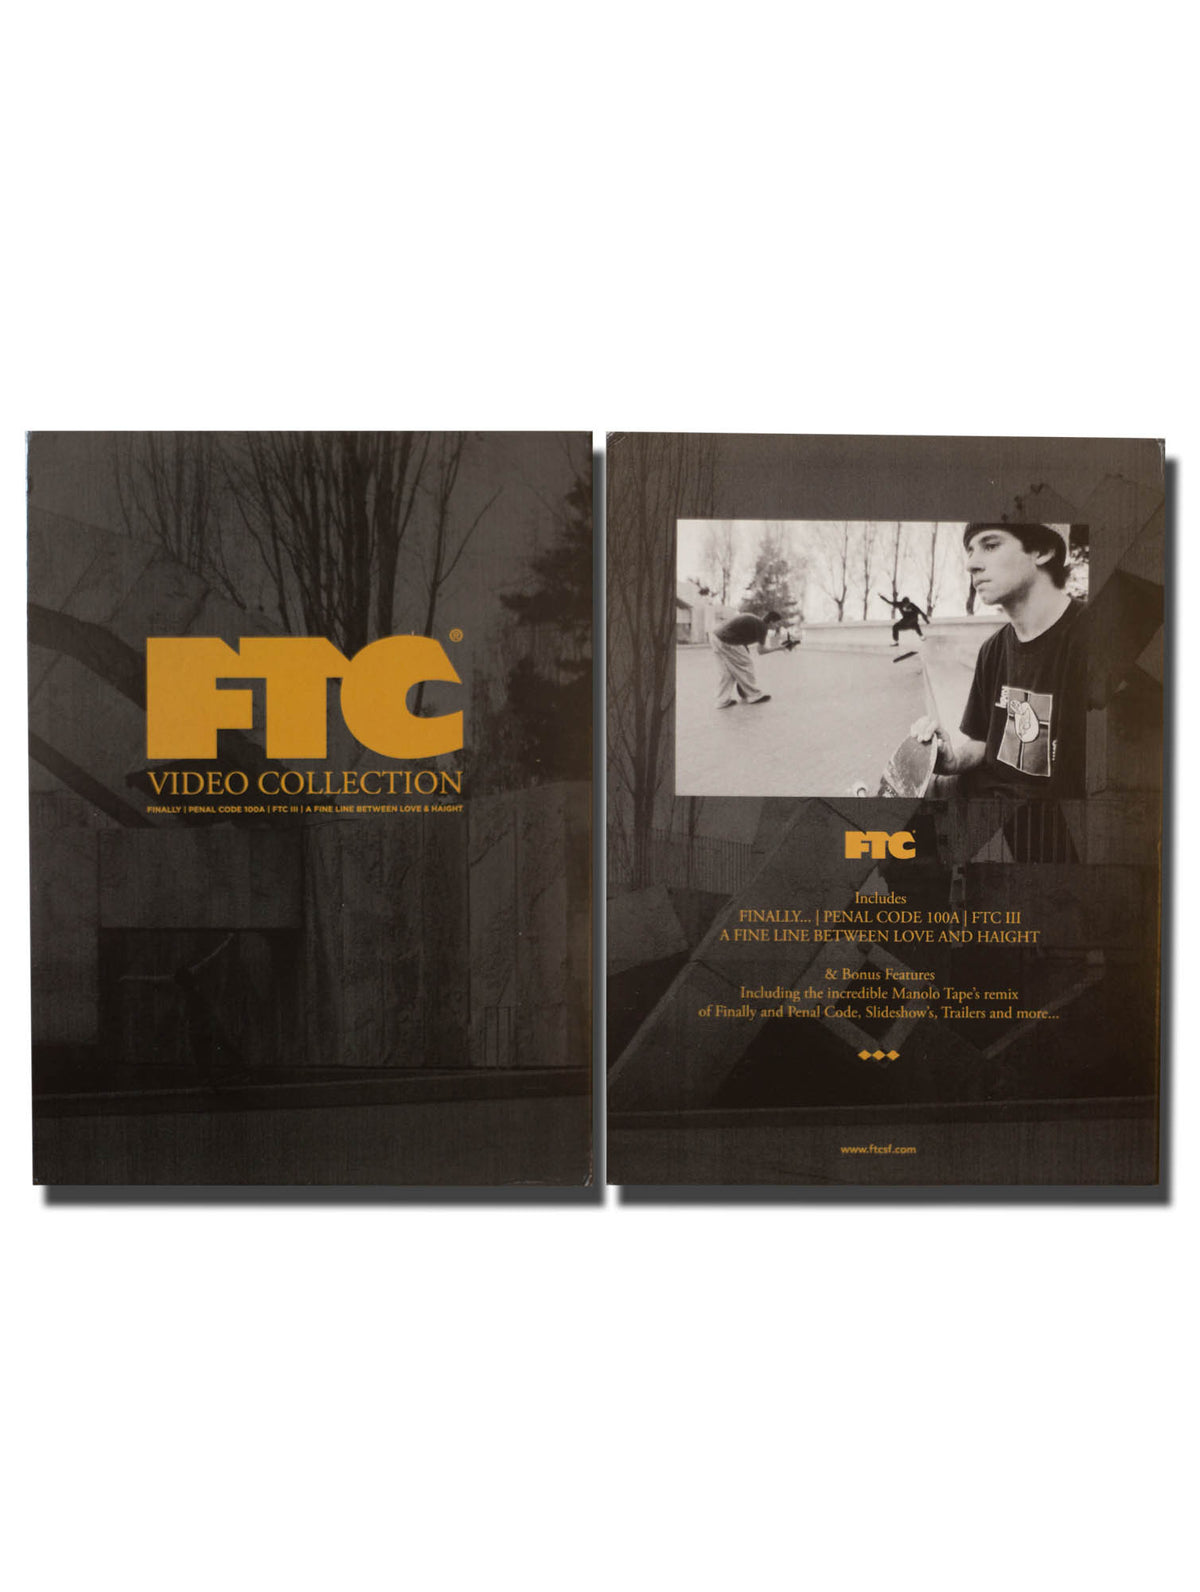 FTC DVD VIDEO COLLECTION